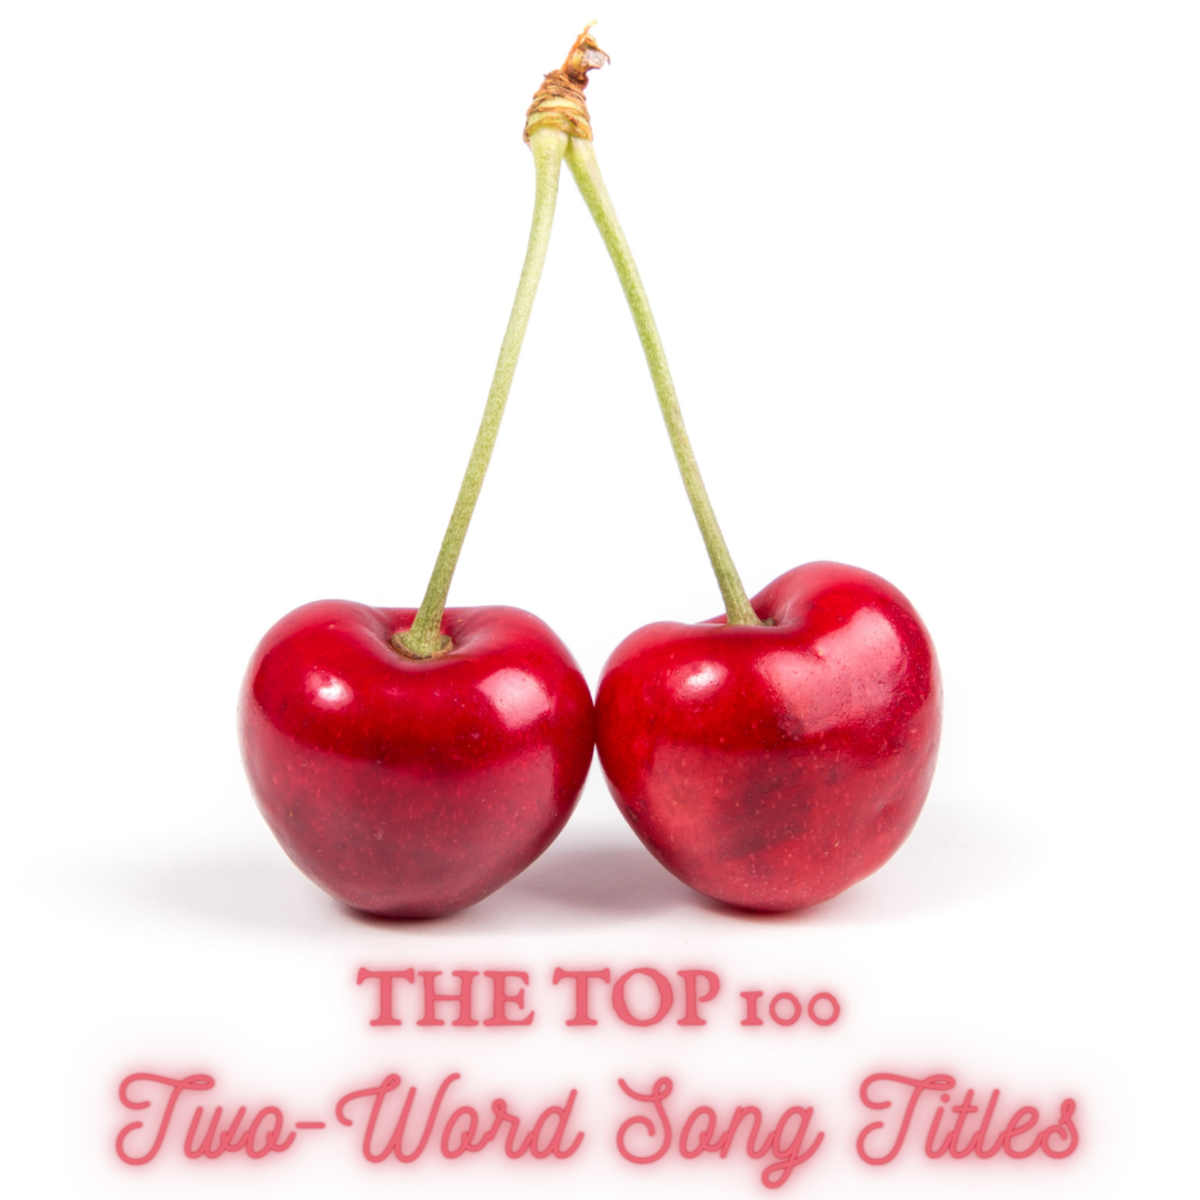 Searching for catchy songs with two words in the title? Look no further!